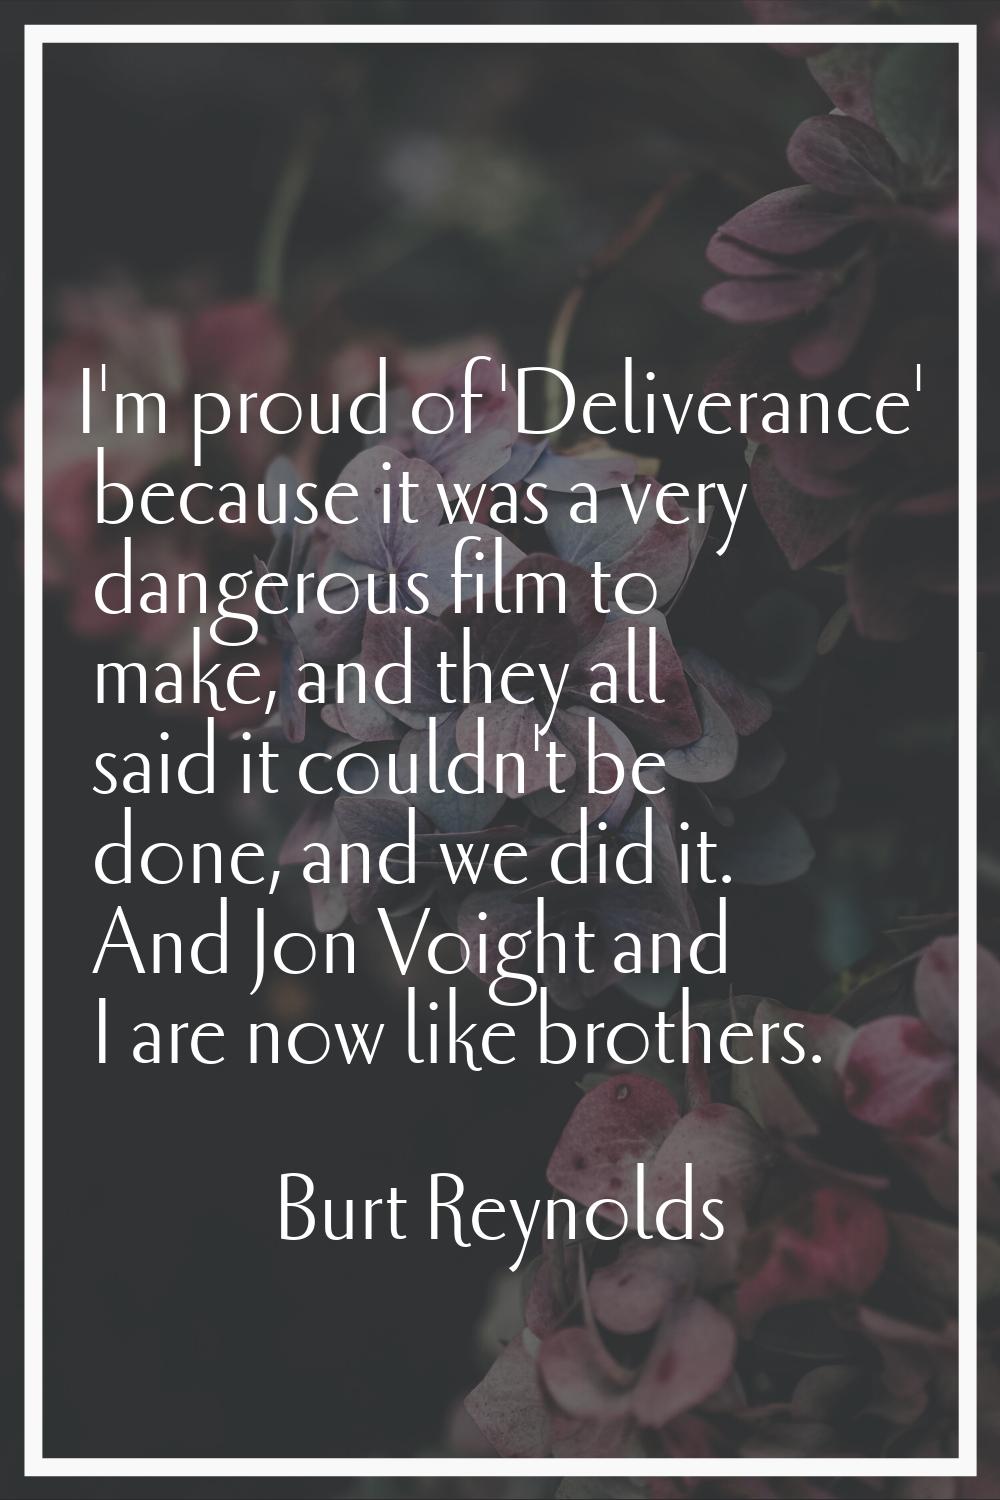 I'm proud of 'Deliverance' because it was a very dangerous film to make, and they all said it could